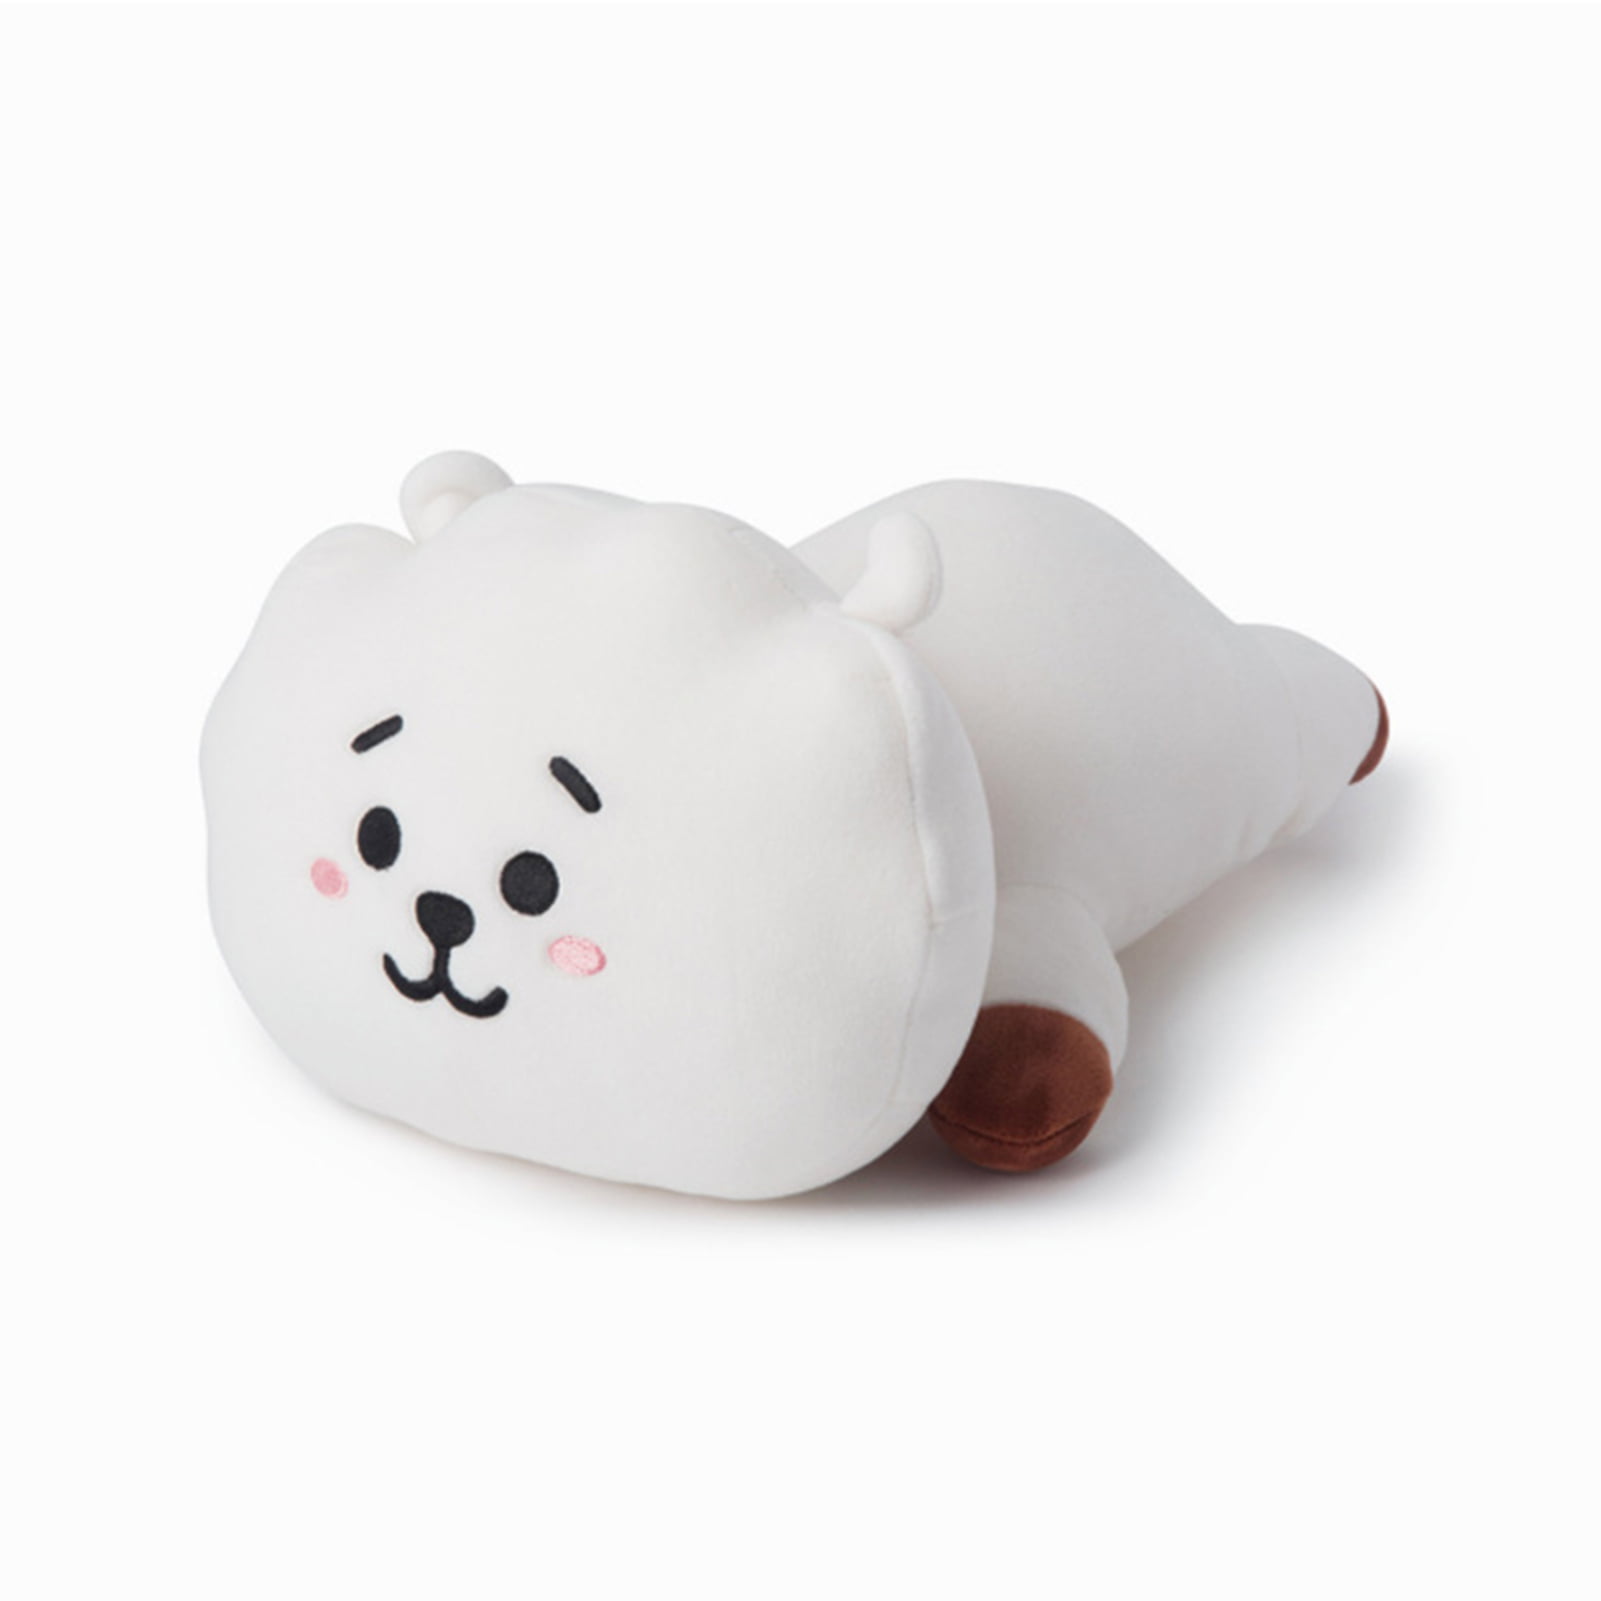 Living Room and Car Soft Cotton Plush Pillow for The Army Bedroom Kpop Bangtan Boys Sofa 11.8 inches Plush Toy Cartoon Pillow for Kids 